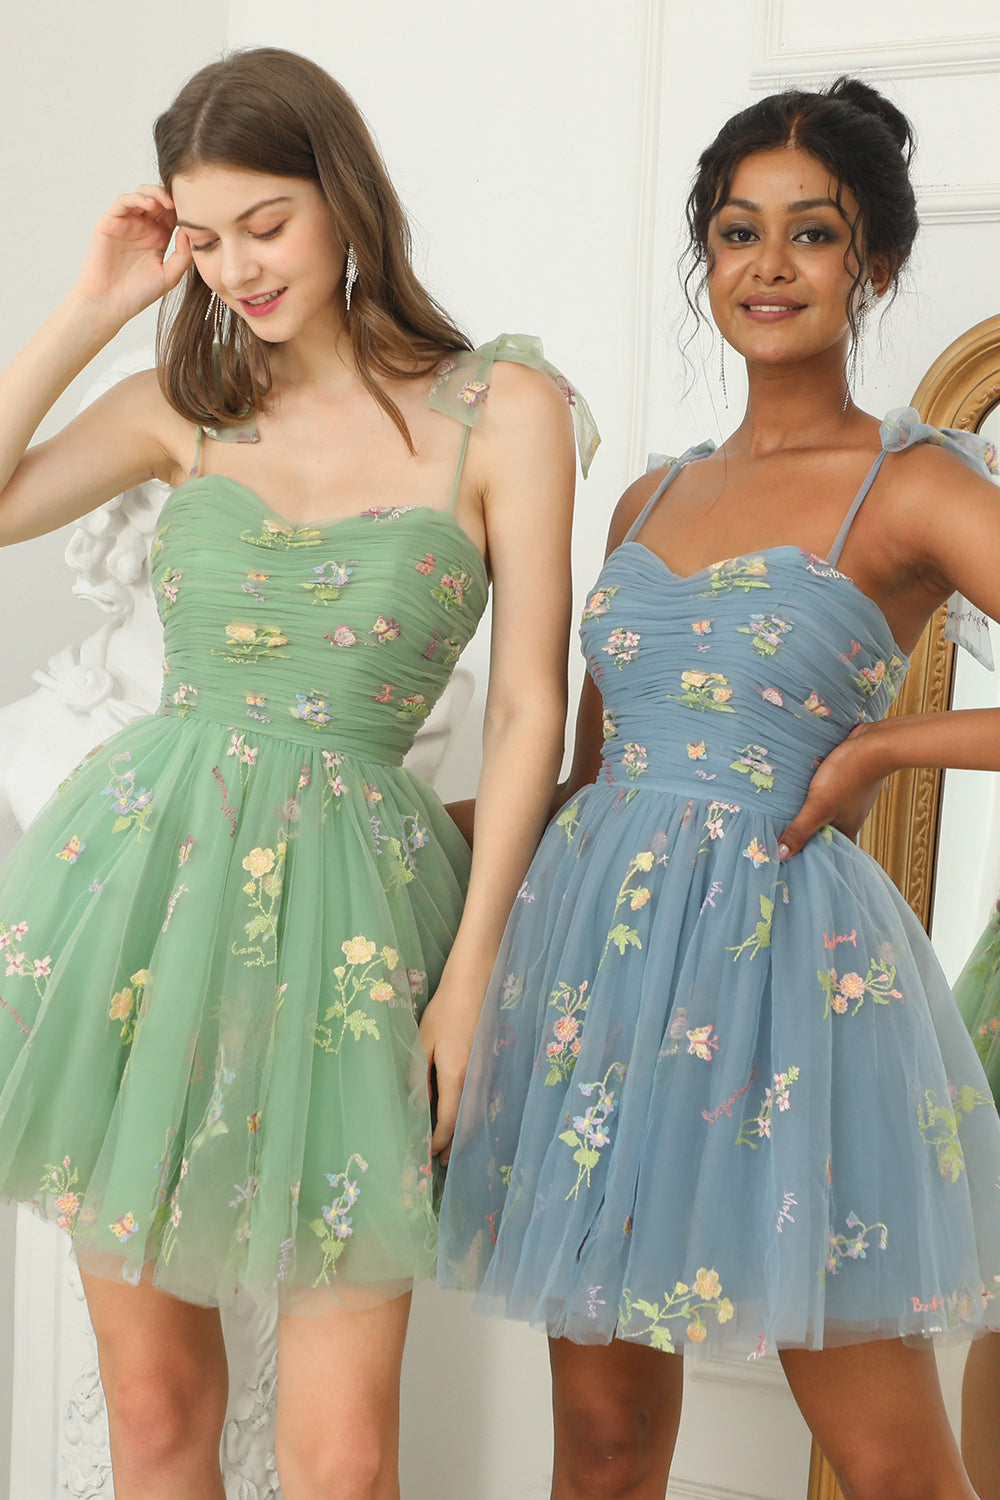 Sweetheart Lavender Short Homecoming Dress with Embroidery